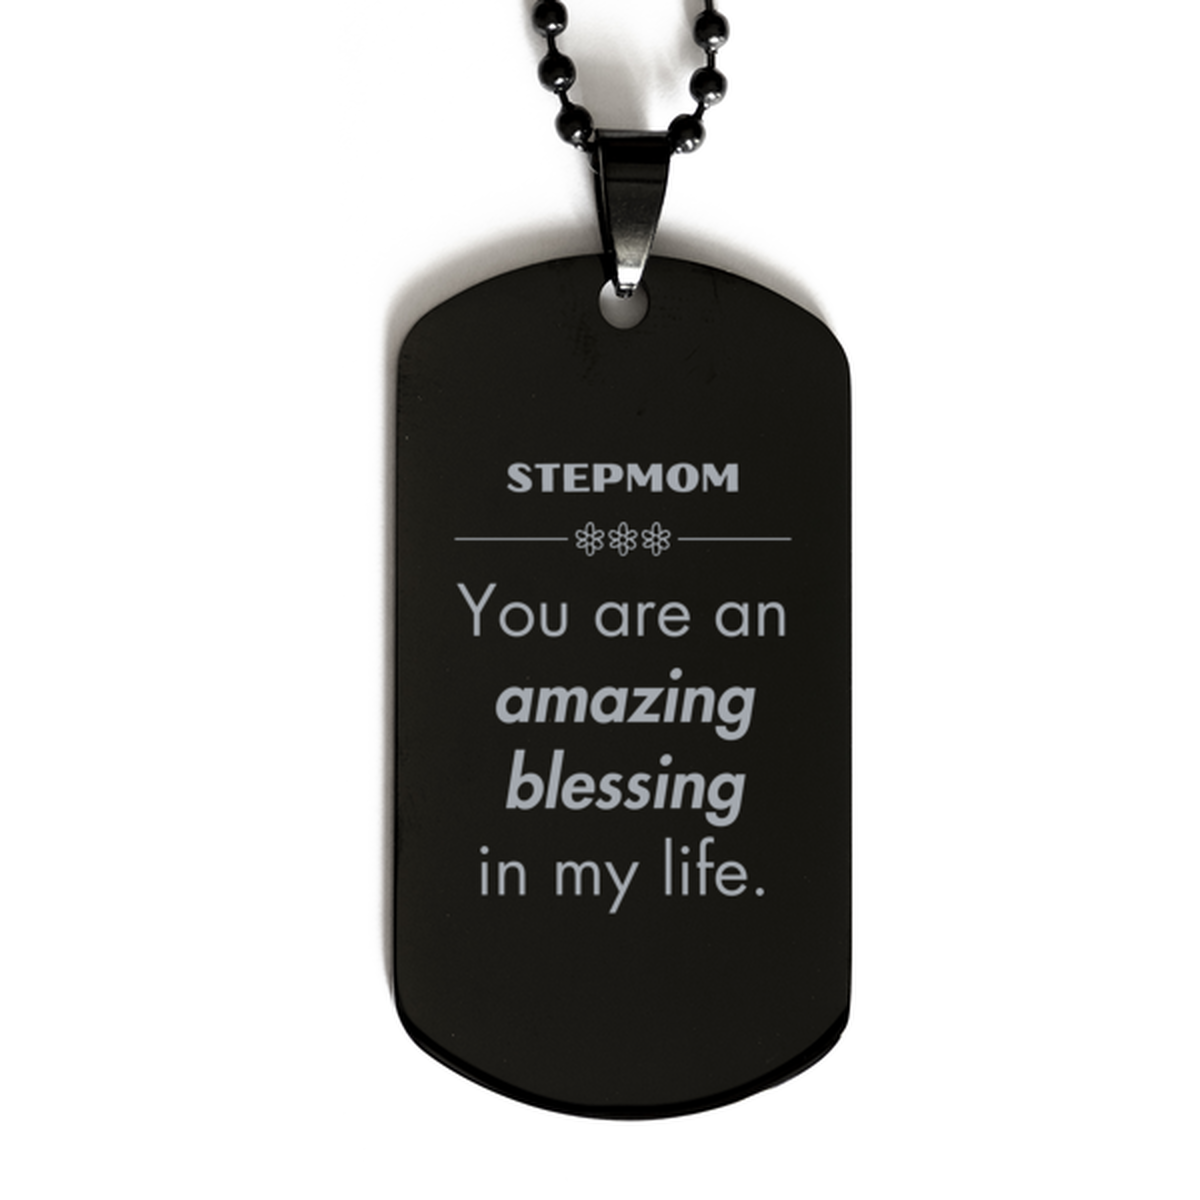 Stepmom Black Dog Tag, You are an amazing blessing in my life, Thank You Gifts For Stepmom, Inspirational Birthday Christmas Unique Gifts For Stepmom